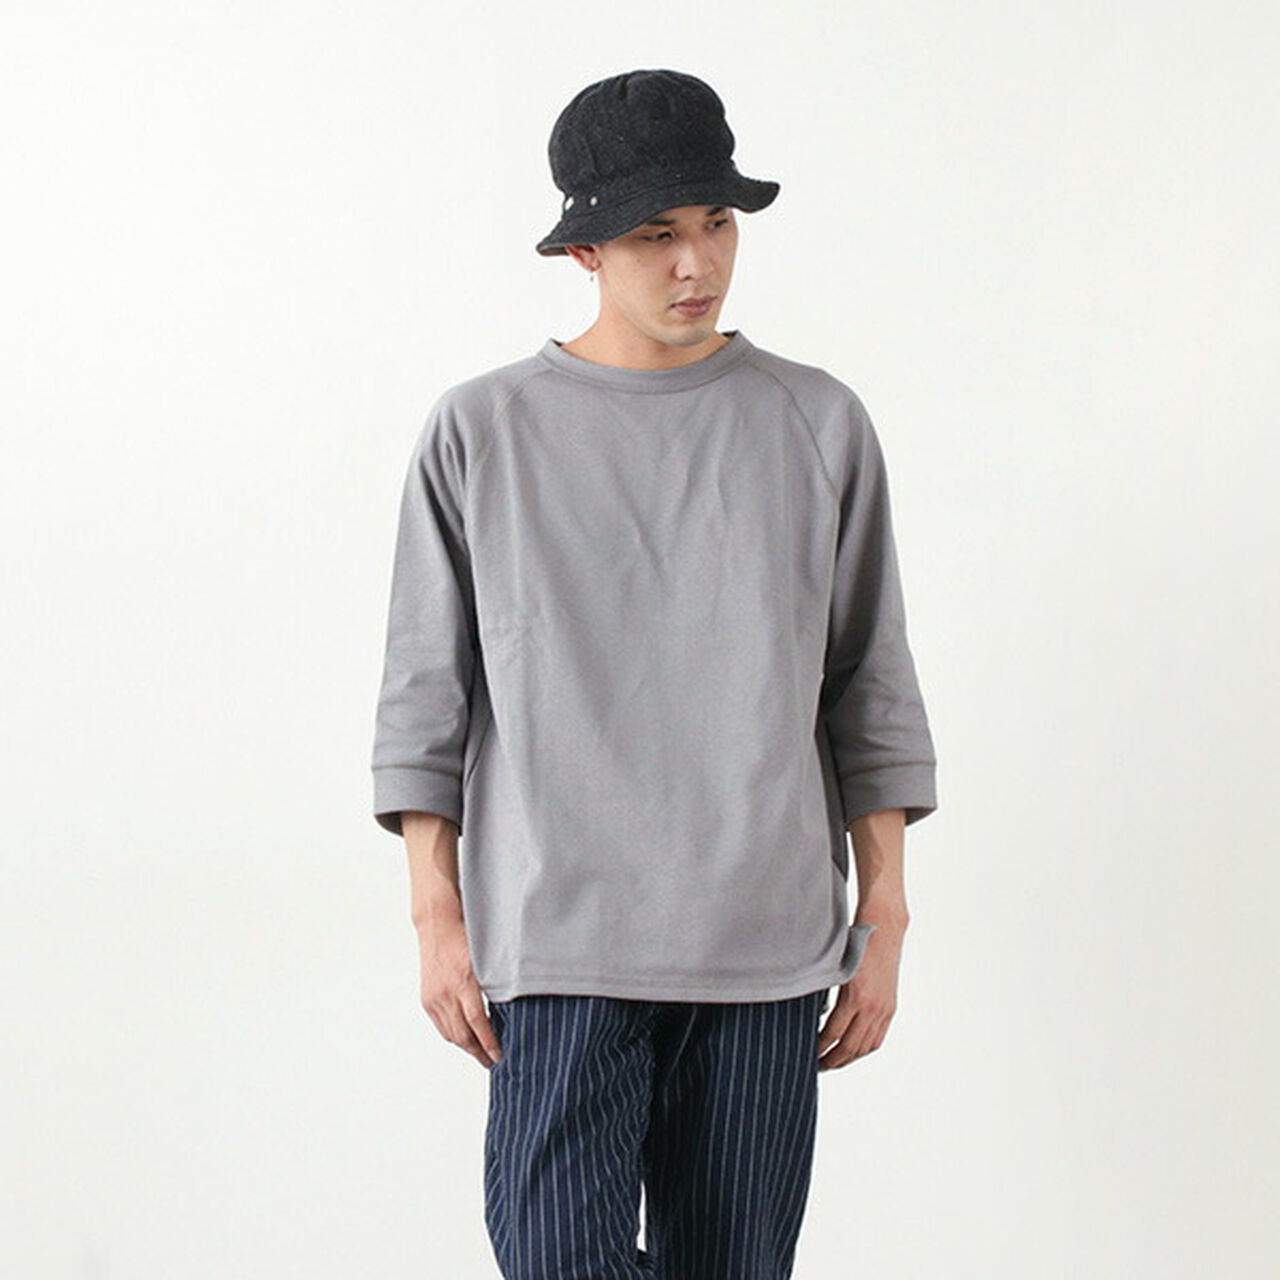 Hemmed Jersey Cotton Crew Neck Cut & Sew,Grey, large image number 0